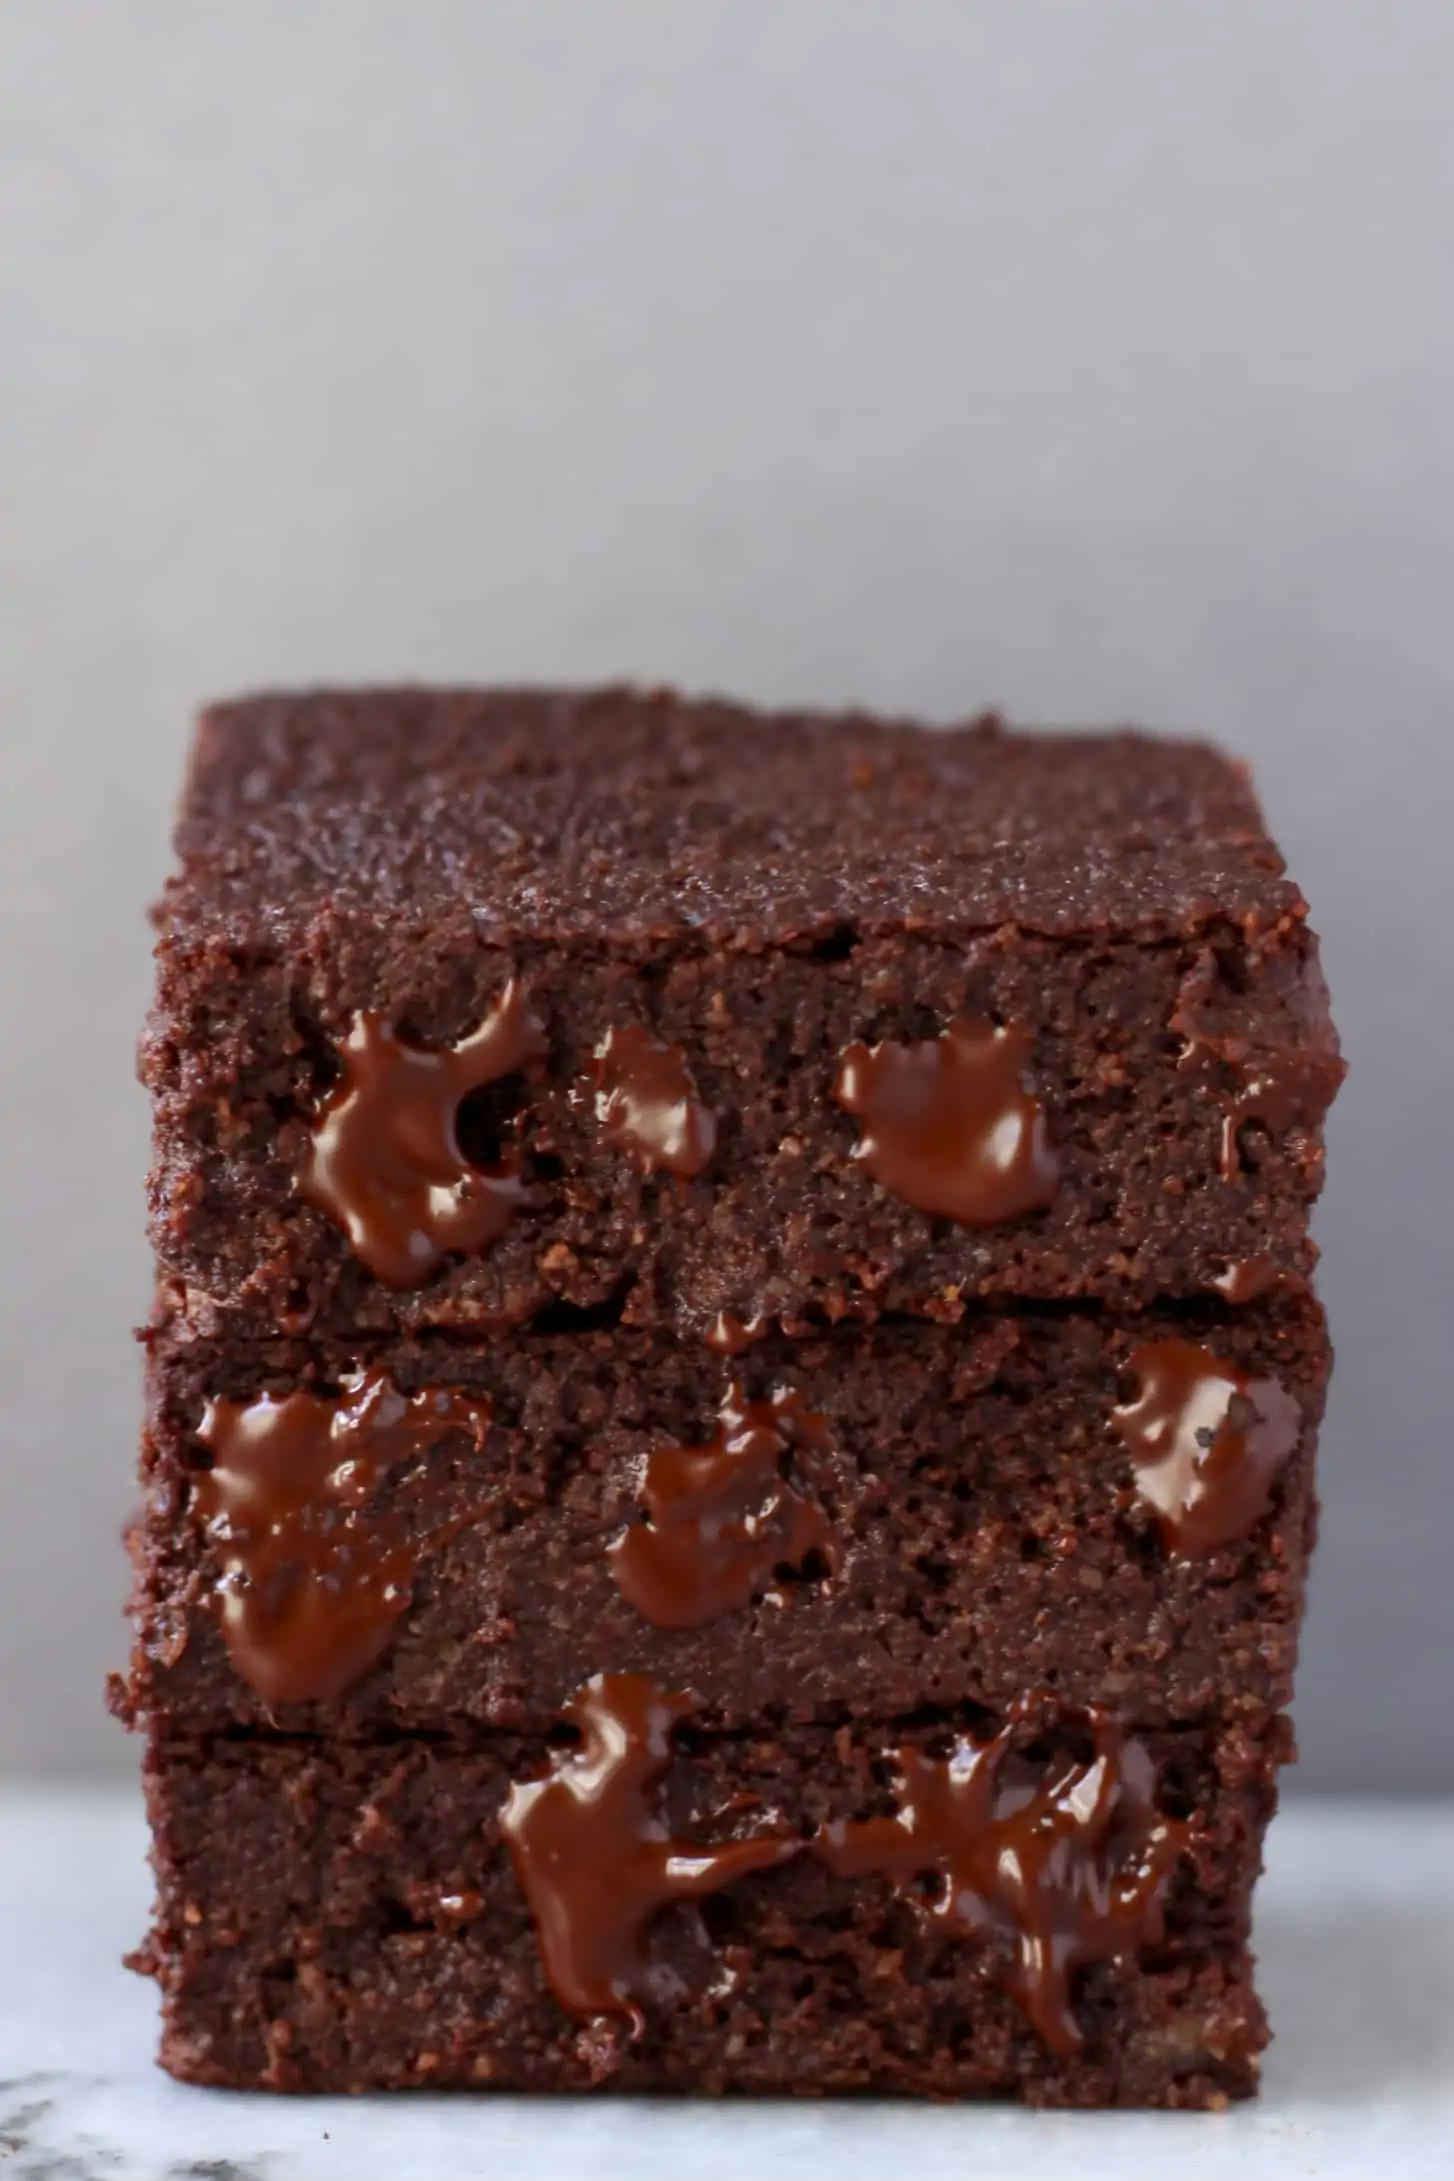 A stack of three square vegan gluten-free chocolate brownies